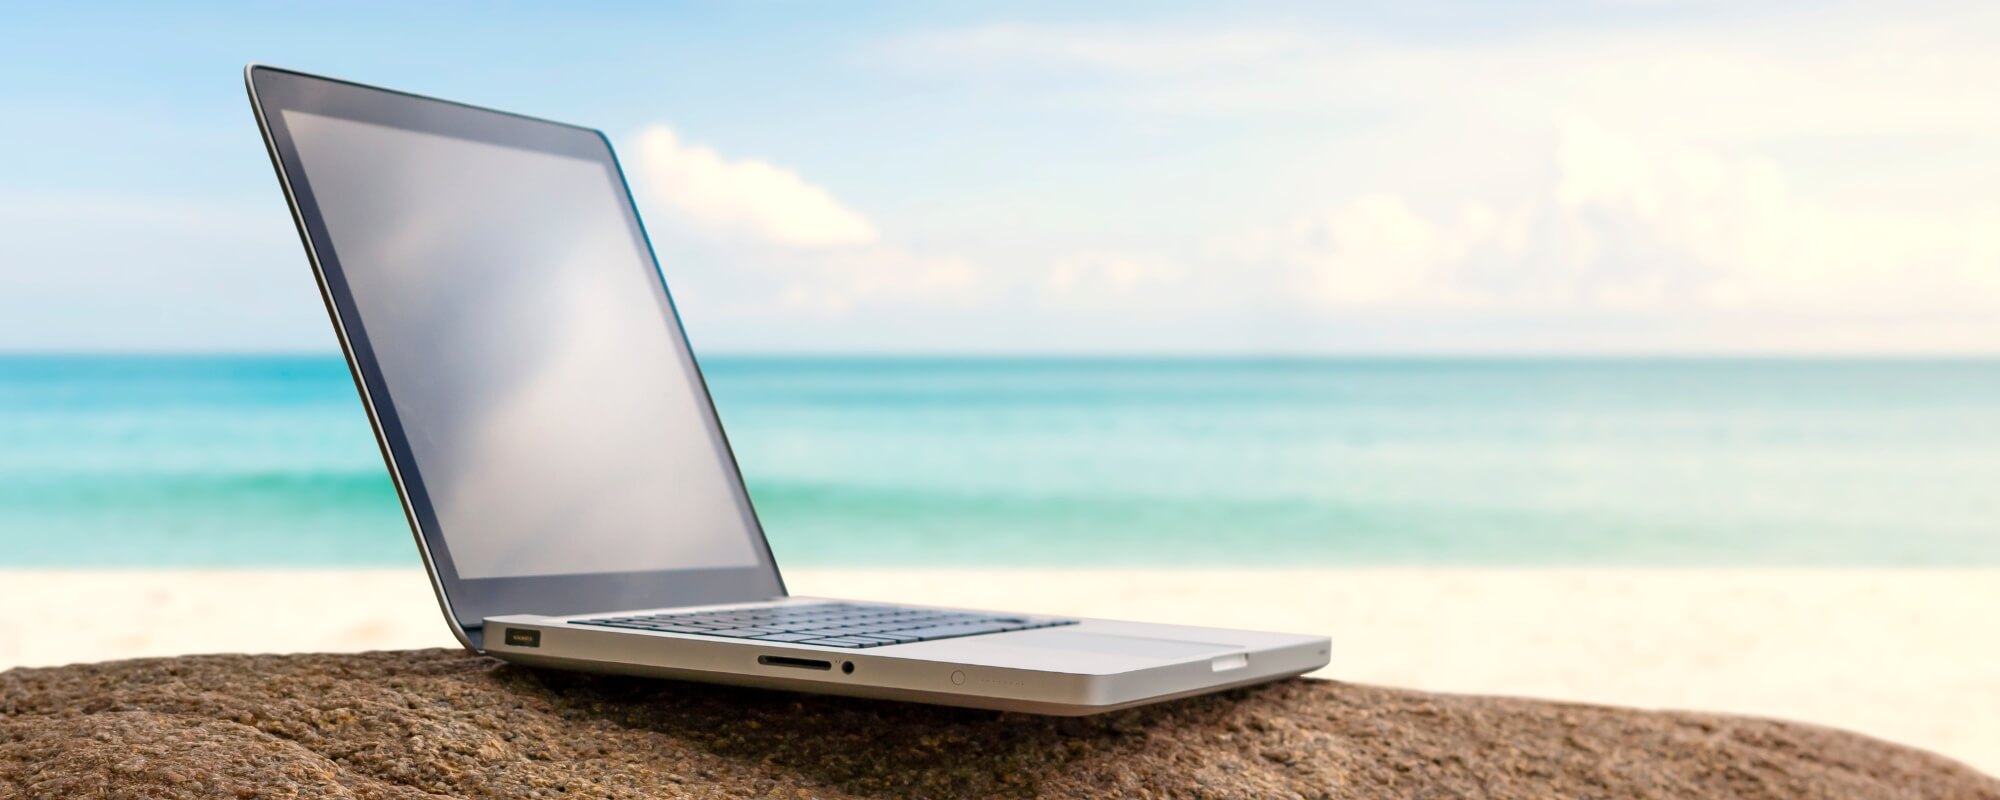 laptop on rock with beach and blue sky in background